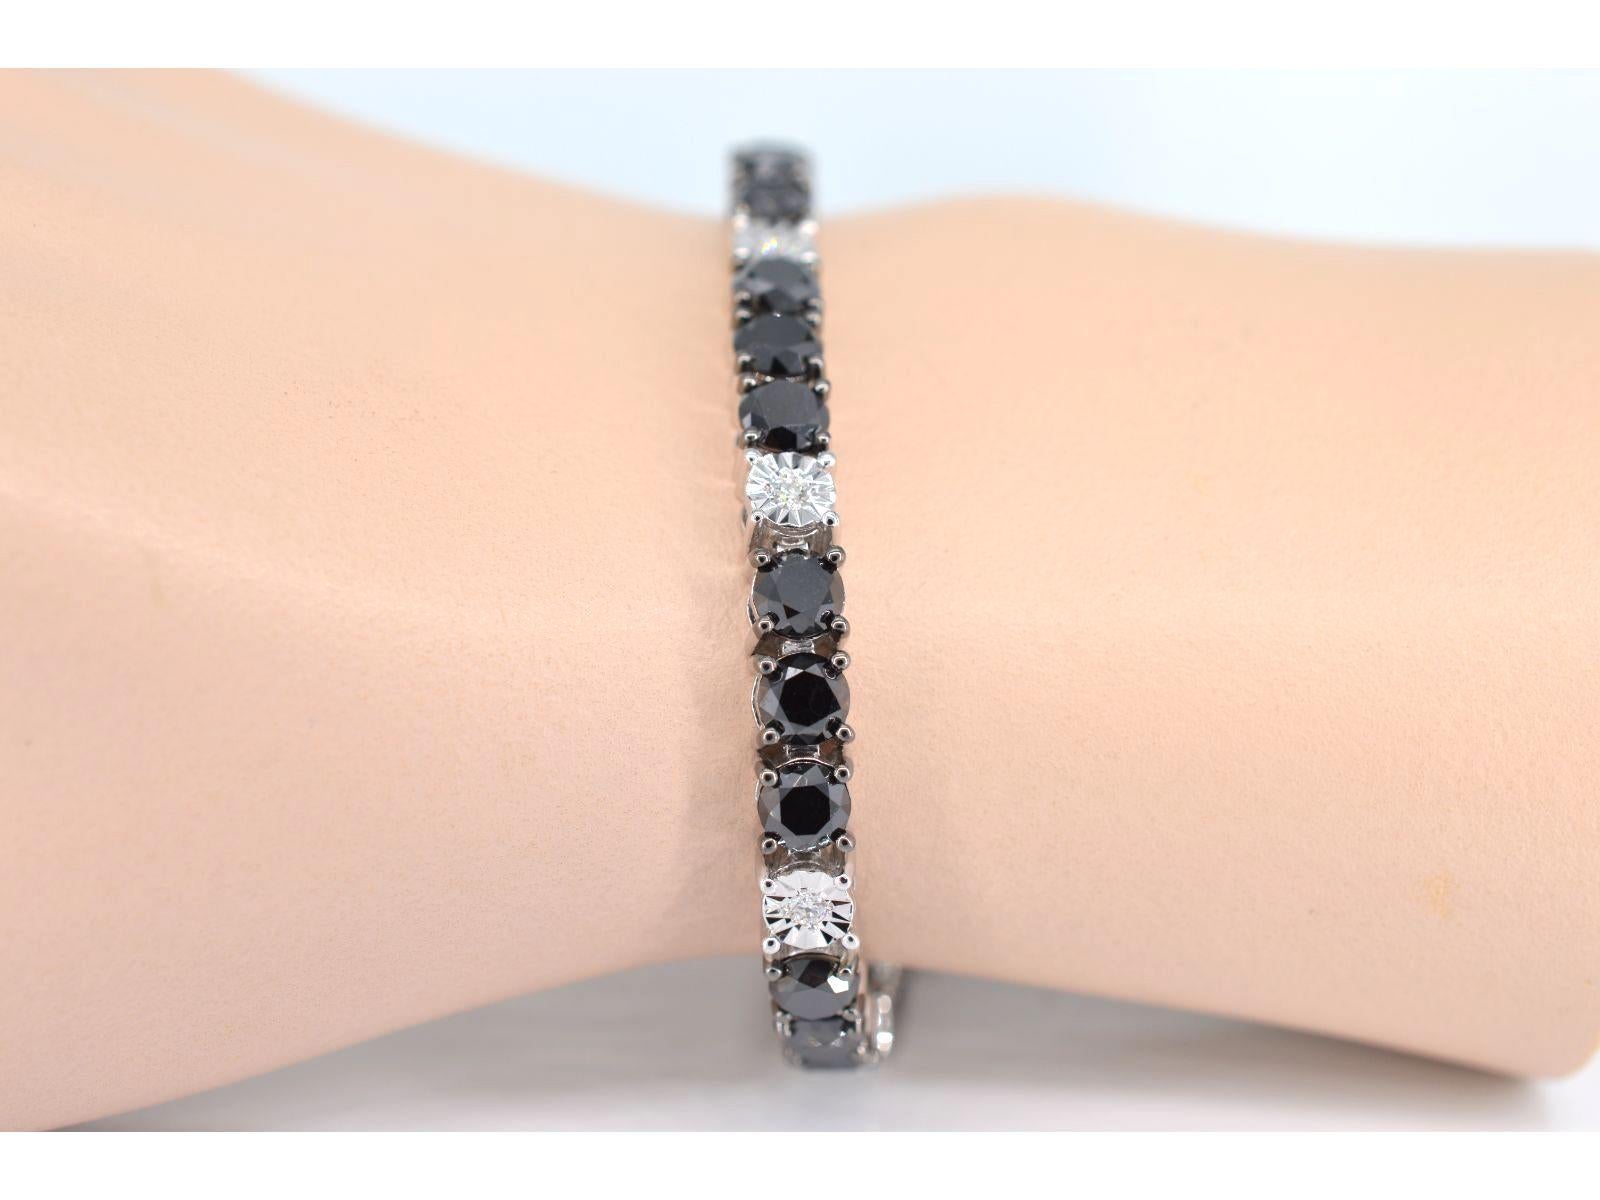 A white gold tennis bracelet set with black and white diamonds is a stunning piece of jewelry that embodies both elegance and modernity. The alternating black and white diamonds add depth and contrast to the classic tennis design, while the white